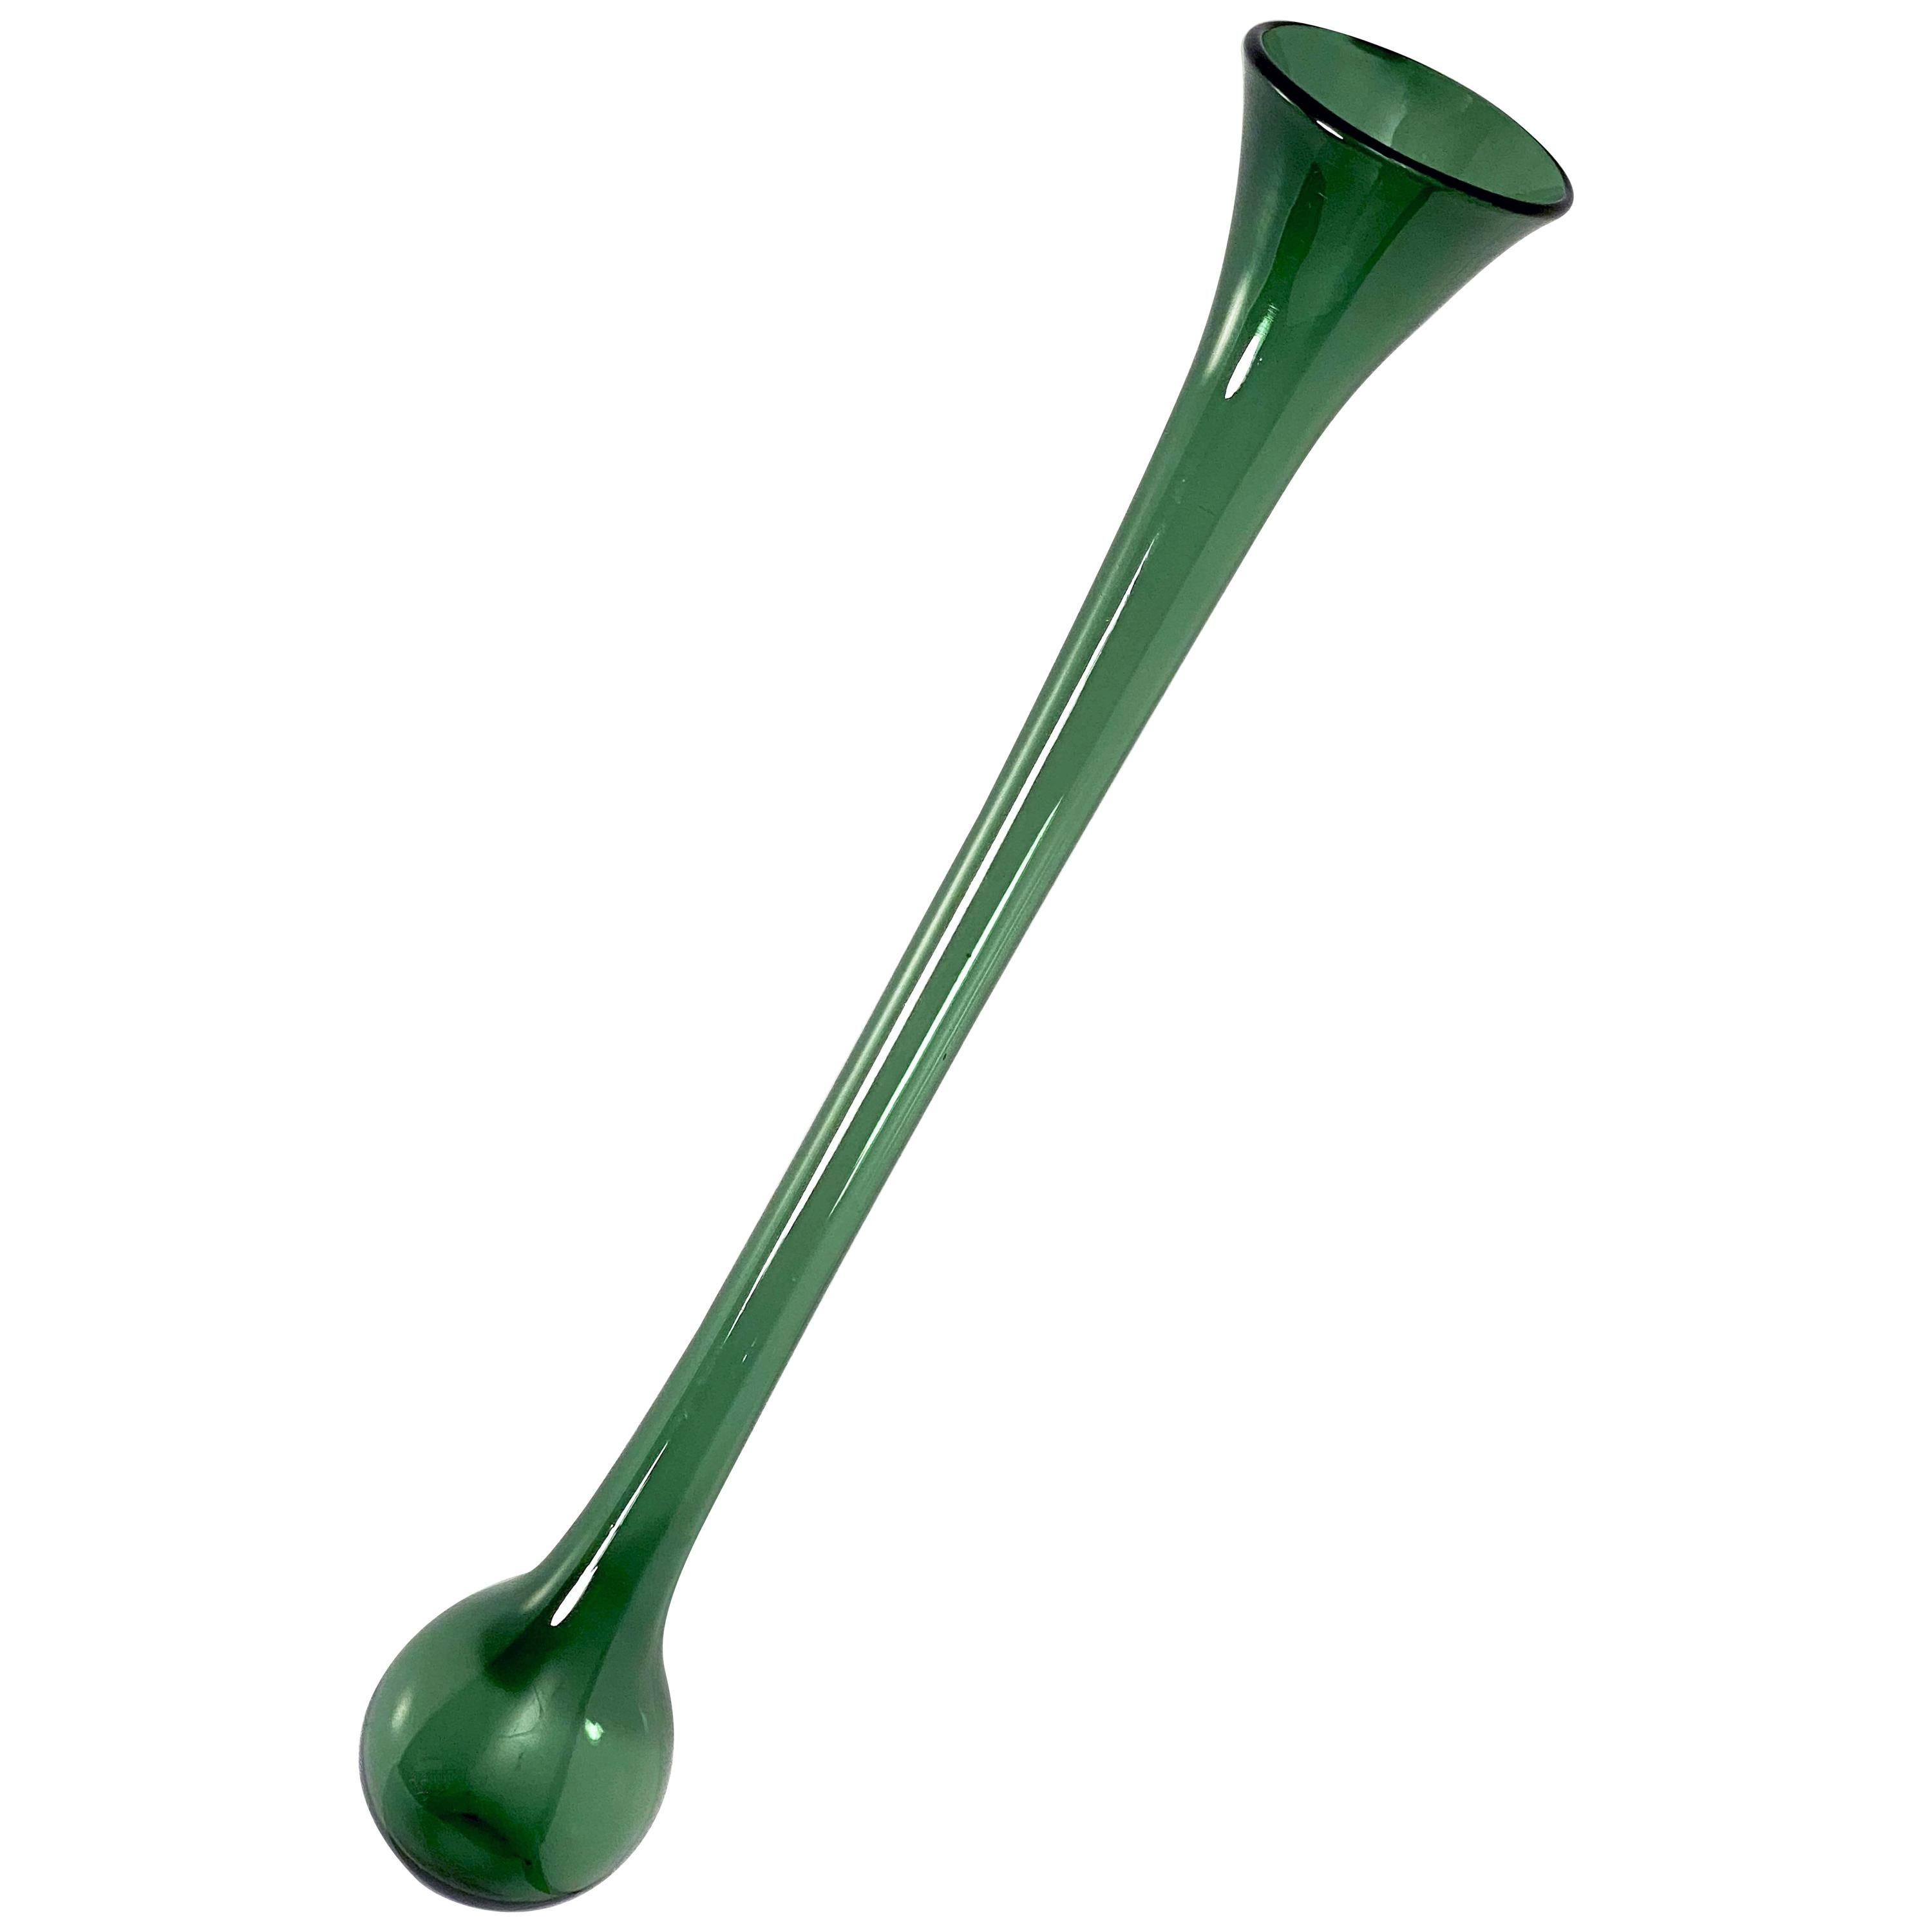 English Traditional "Yard of Ale" Drinking Vessel of Green Glass